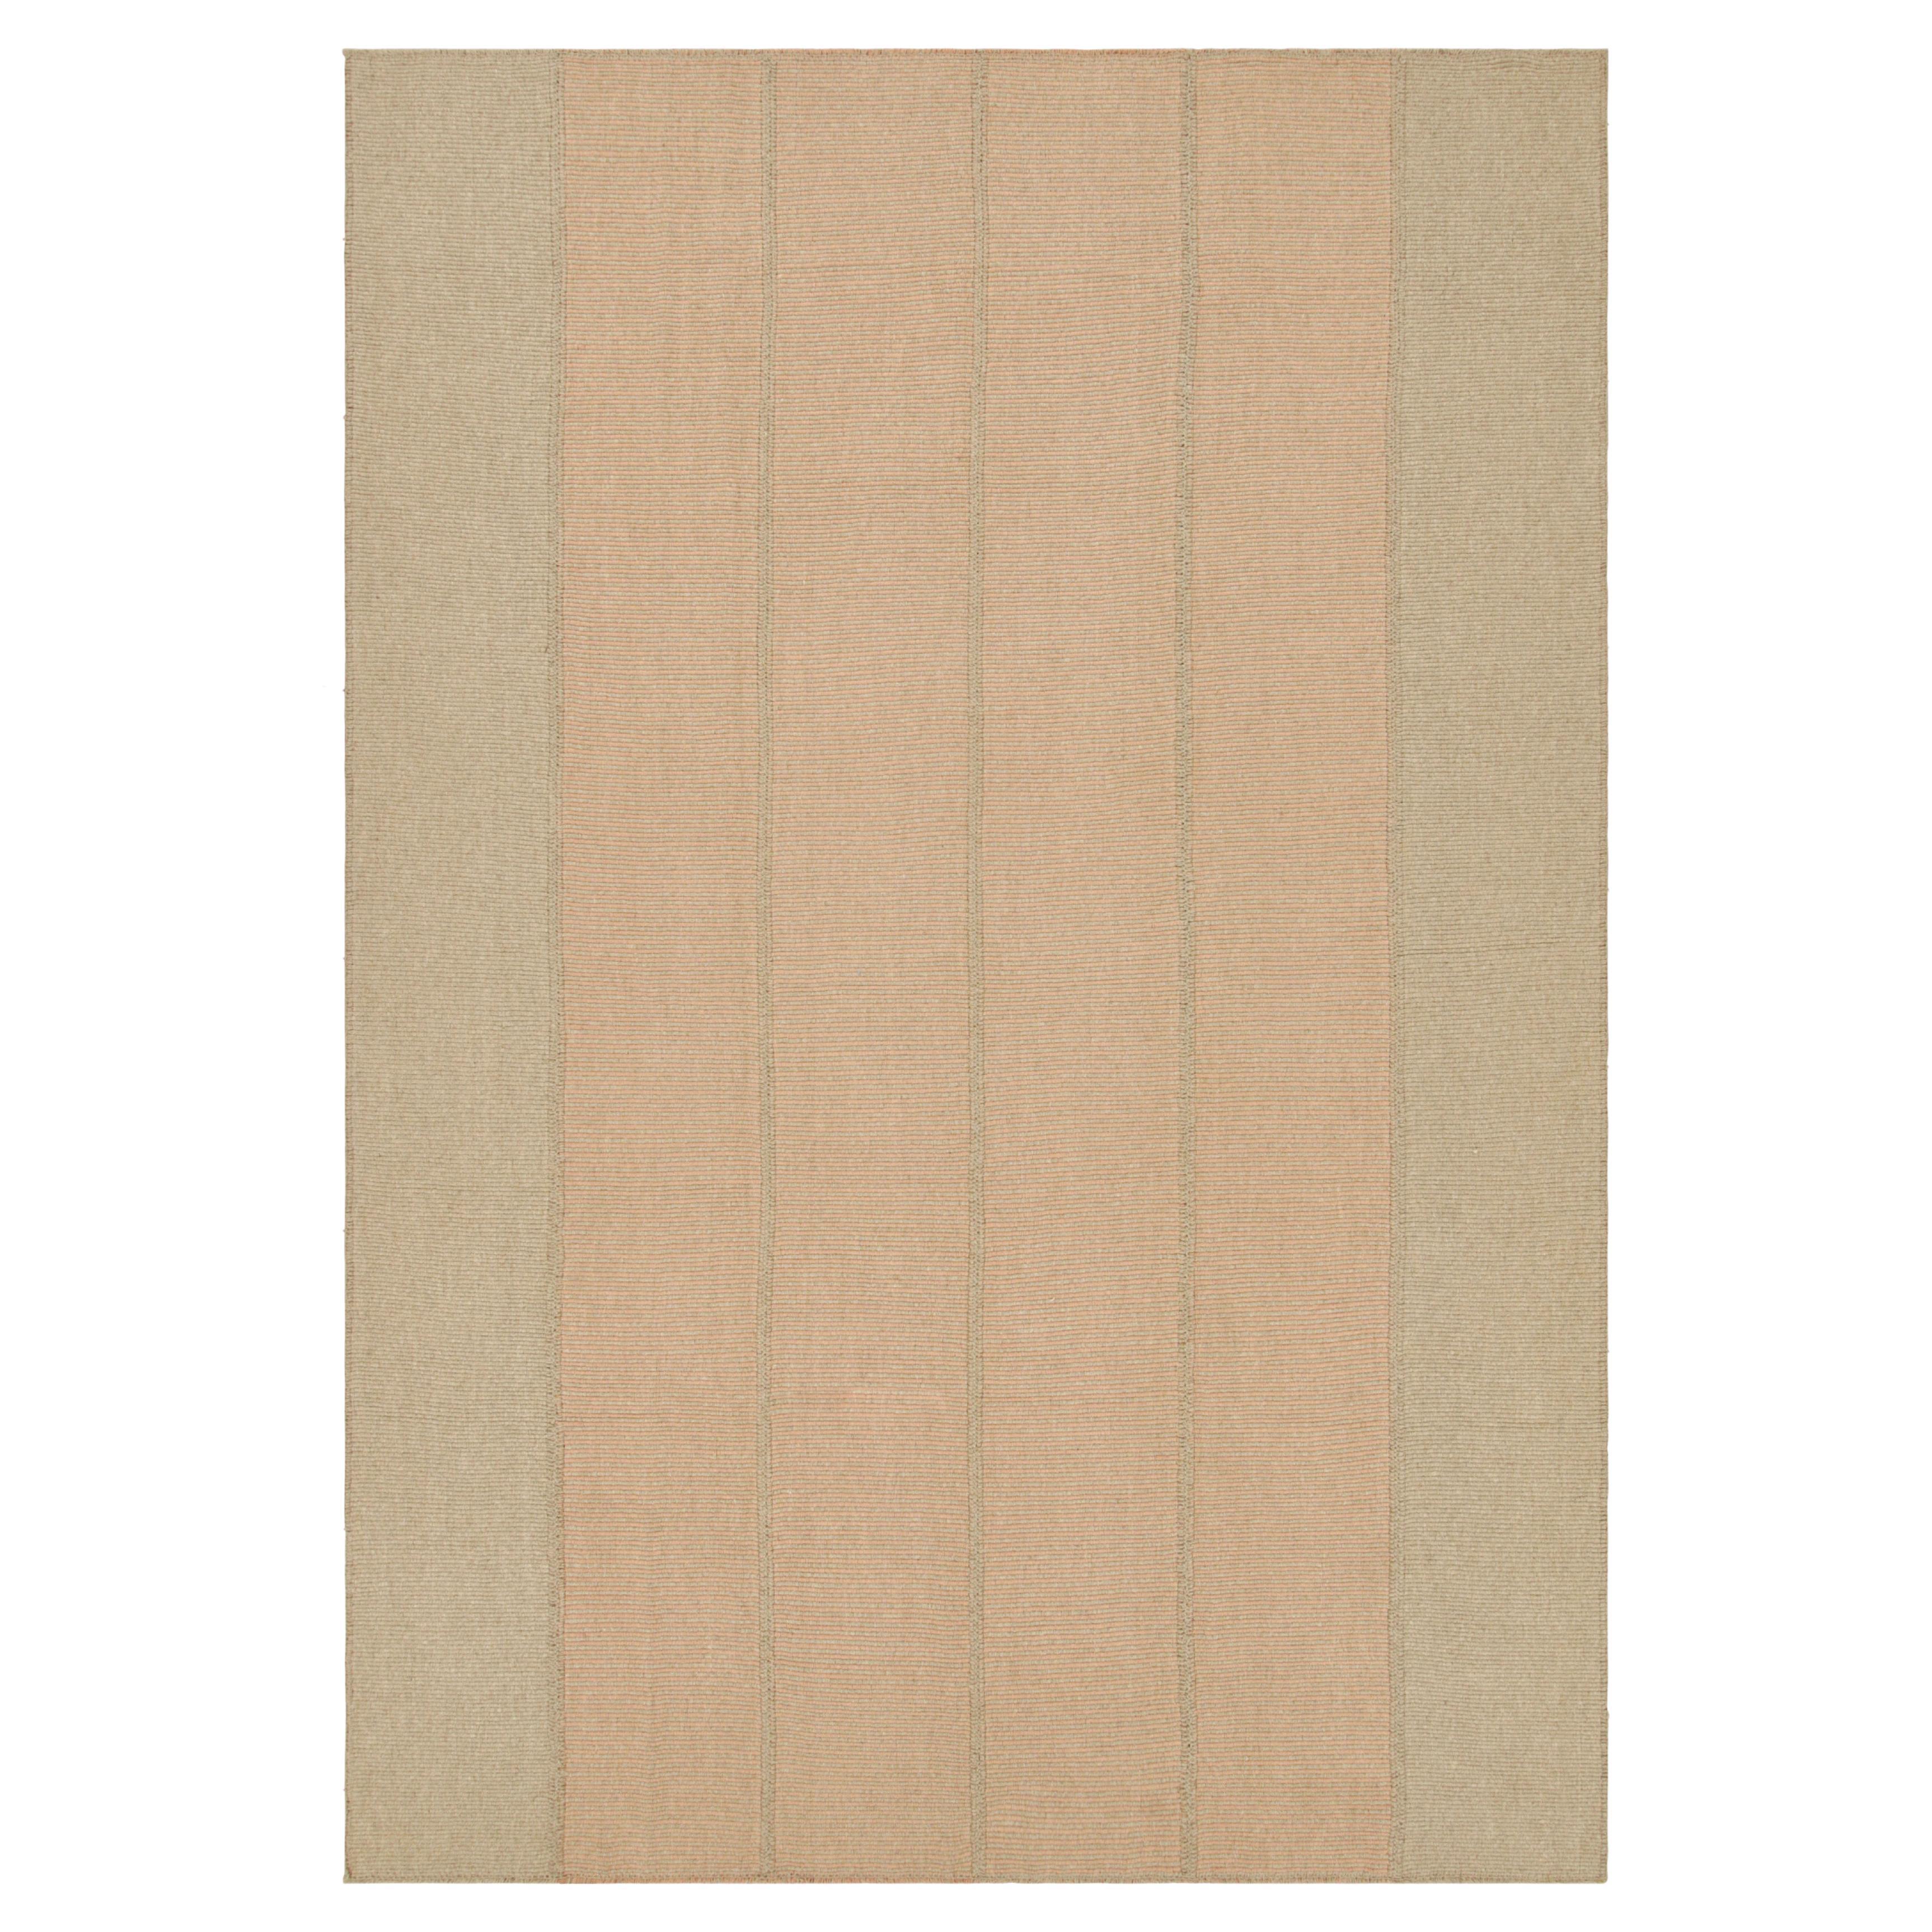 Rug & Kilim’s Contemporary Kilim in Peach and Beige Textural Stripes  For Sale